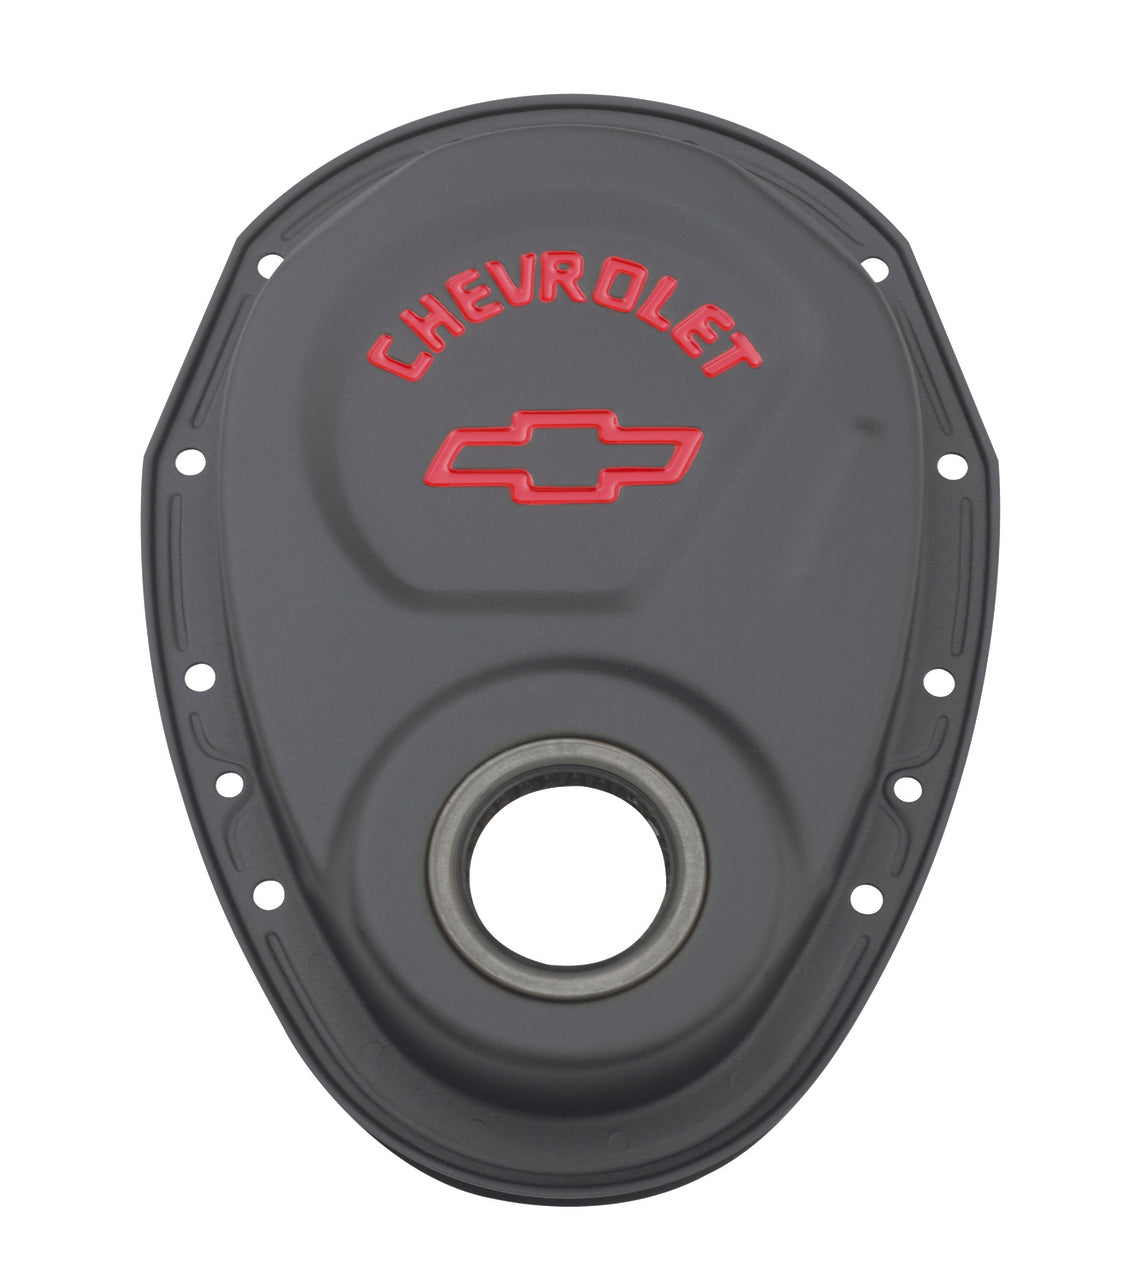 Chevrolet Performance Parts - 141-753 - Engine Timing Cover - Timing Chain Cover Black Steel With Chevy and Bowtie Logo For SB Chevy 69-91